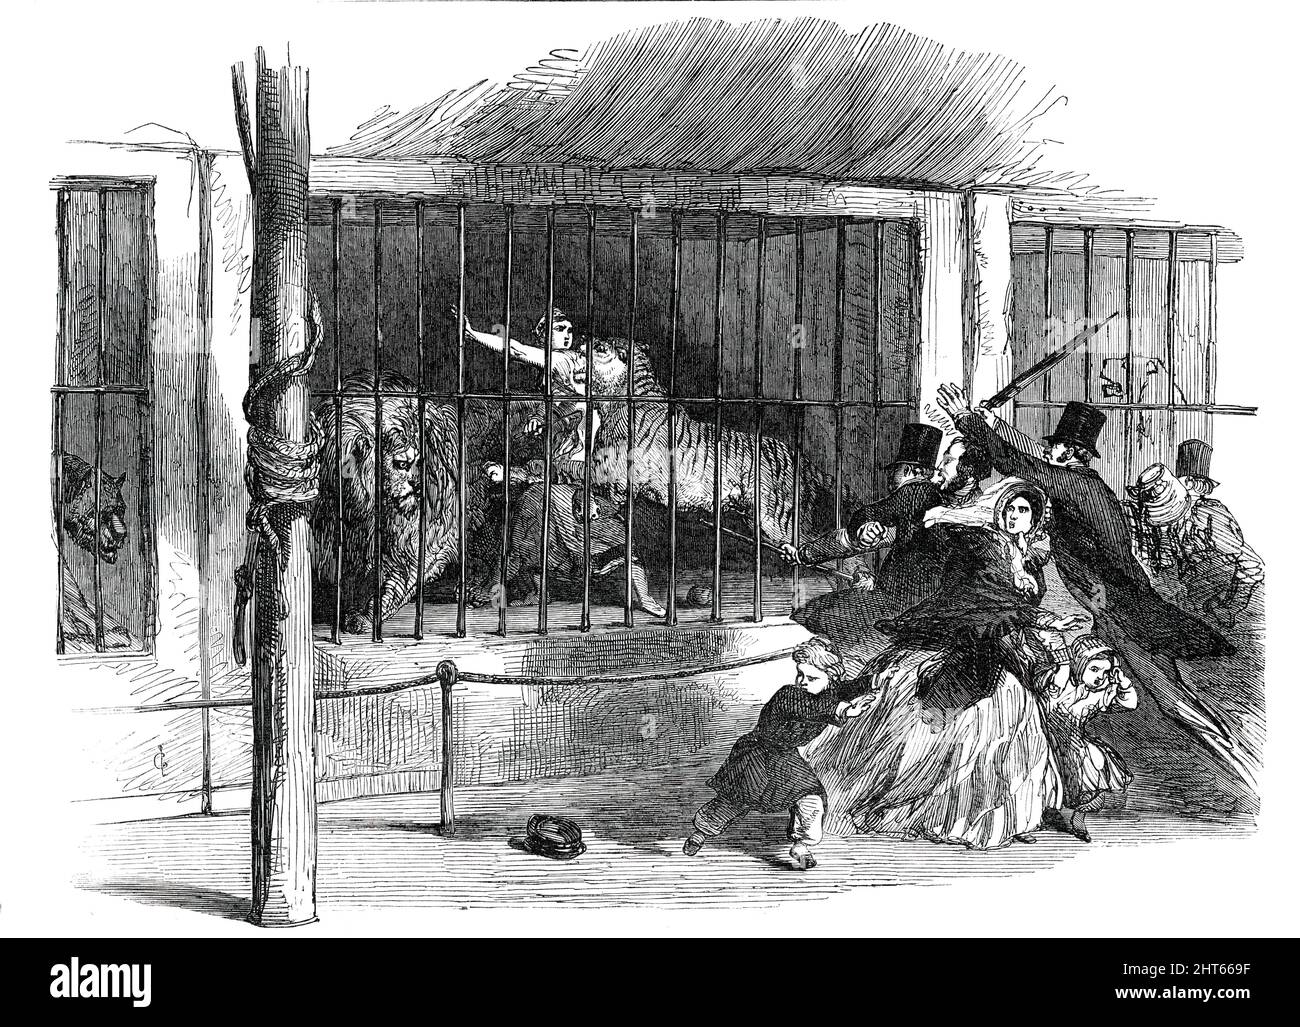 Death of the &quot;Lion Queen&quot;, in Wombwell's Menagerie, at Chatham [in Kent], 1850. 'It was the business of the deceased [17-year-old Ellen Blight] to go into the dens and perform with the beasts...She had only been in two or three minutes, but had gone through the main part of the performance, excepting that of making the lion sit down in a particular part of the cage, when the tiger being in her way, the deceased struck it lightly with a small whip which she carried in her hand. The beast growled, as if in anger, and, crouching close to the bottom of the den, stretched out its paw, as Stock Photo